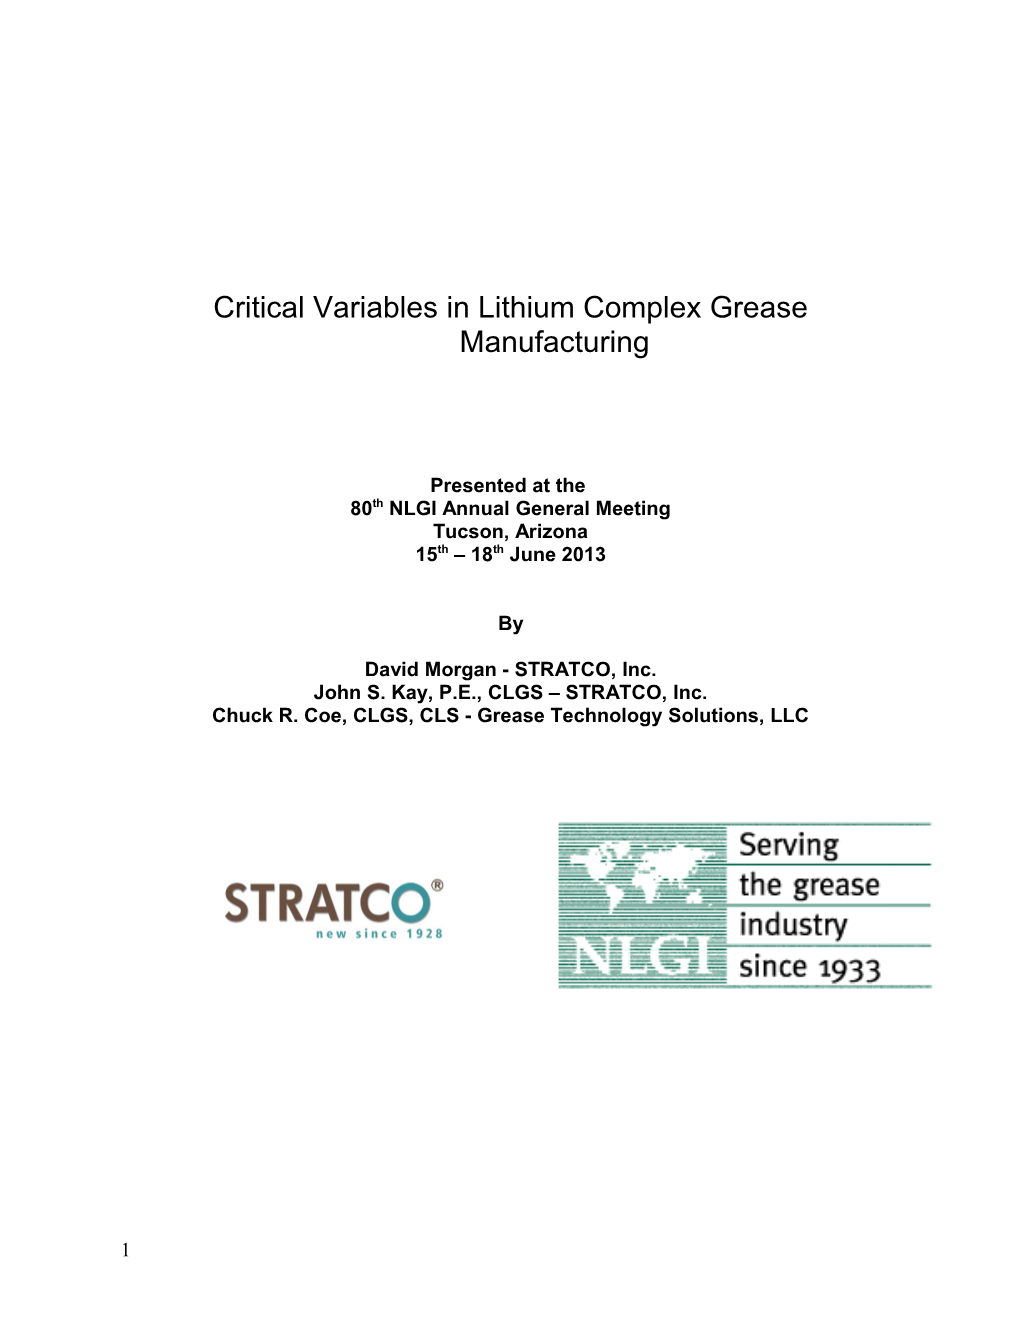 Critical Variables in Lithium Complex Grease Manufacturing